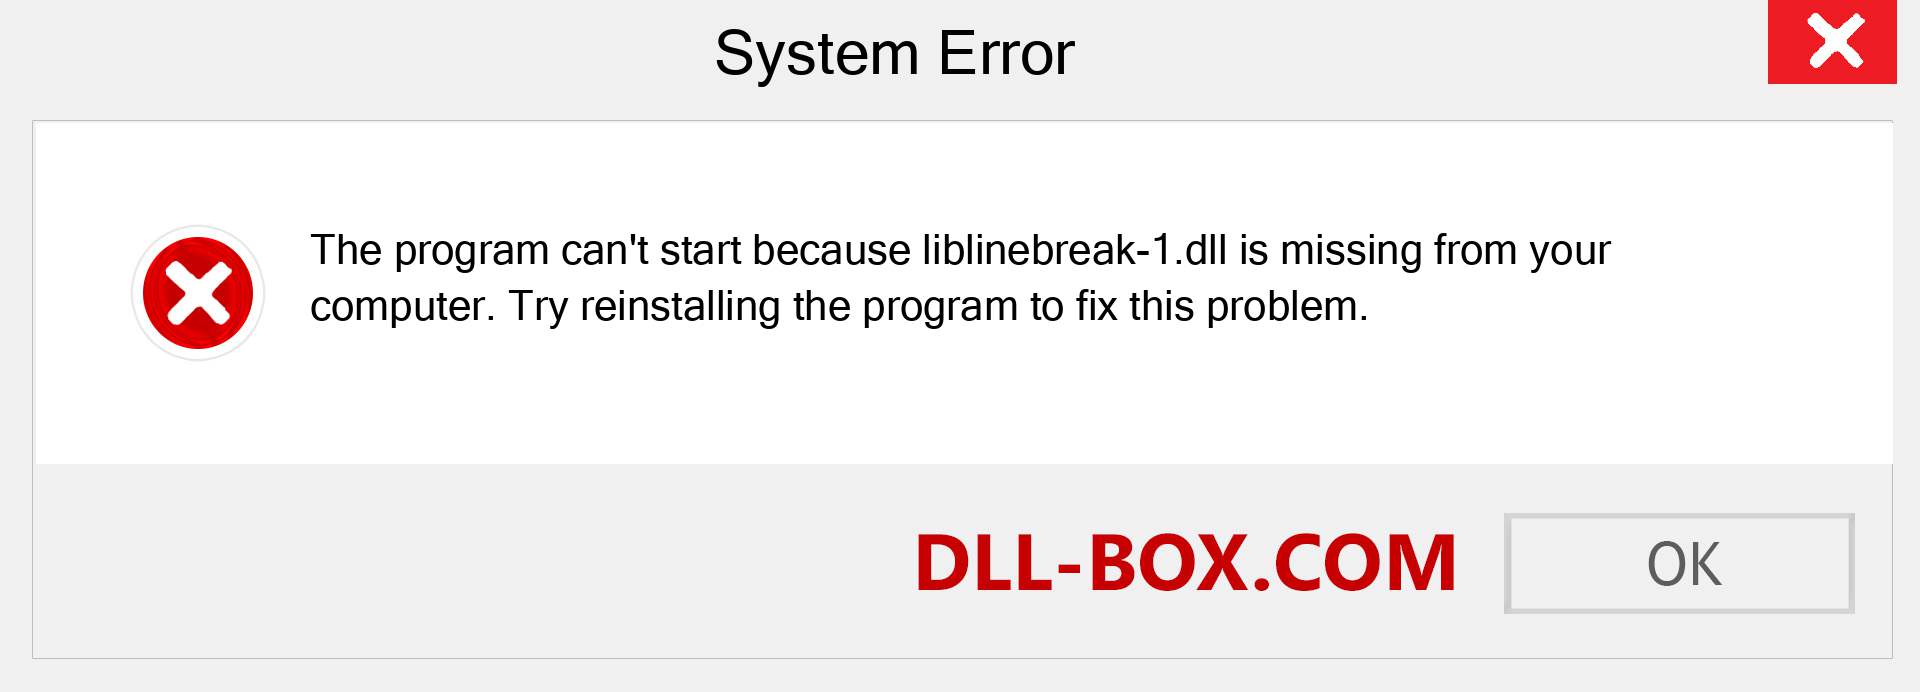  liblinebreak-1.dll file is missing?. Download for Windows 7, 8, 10 - Fix  liblinebreak-1 dll Missing Error on Windows, photos, images